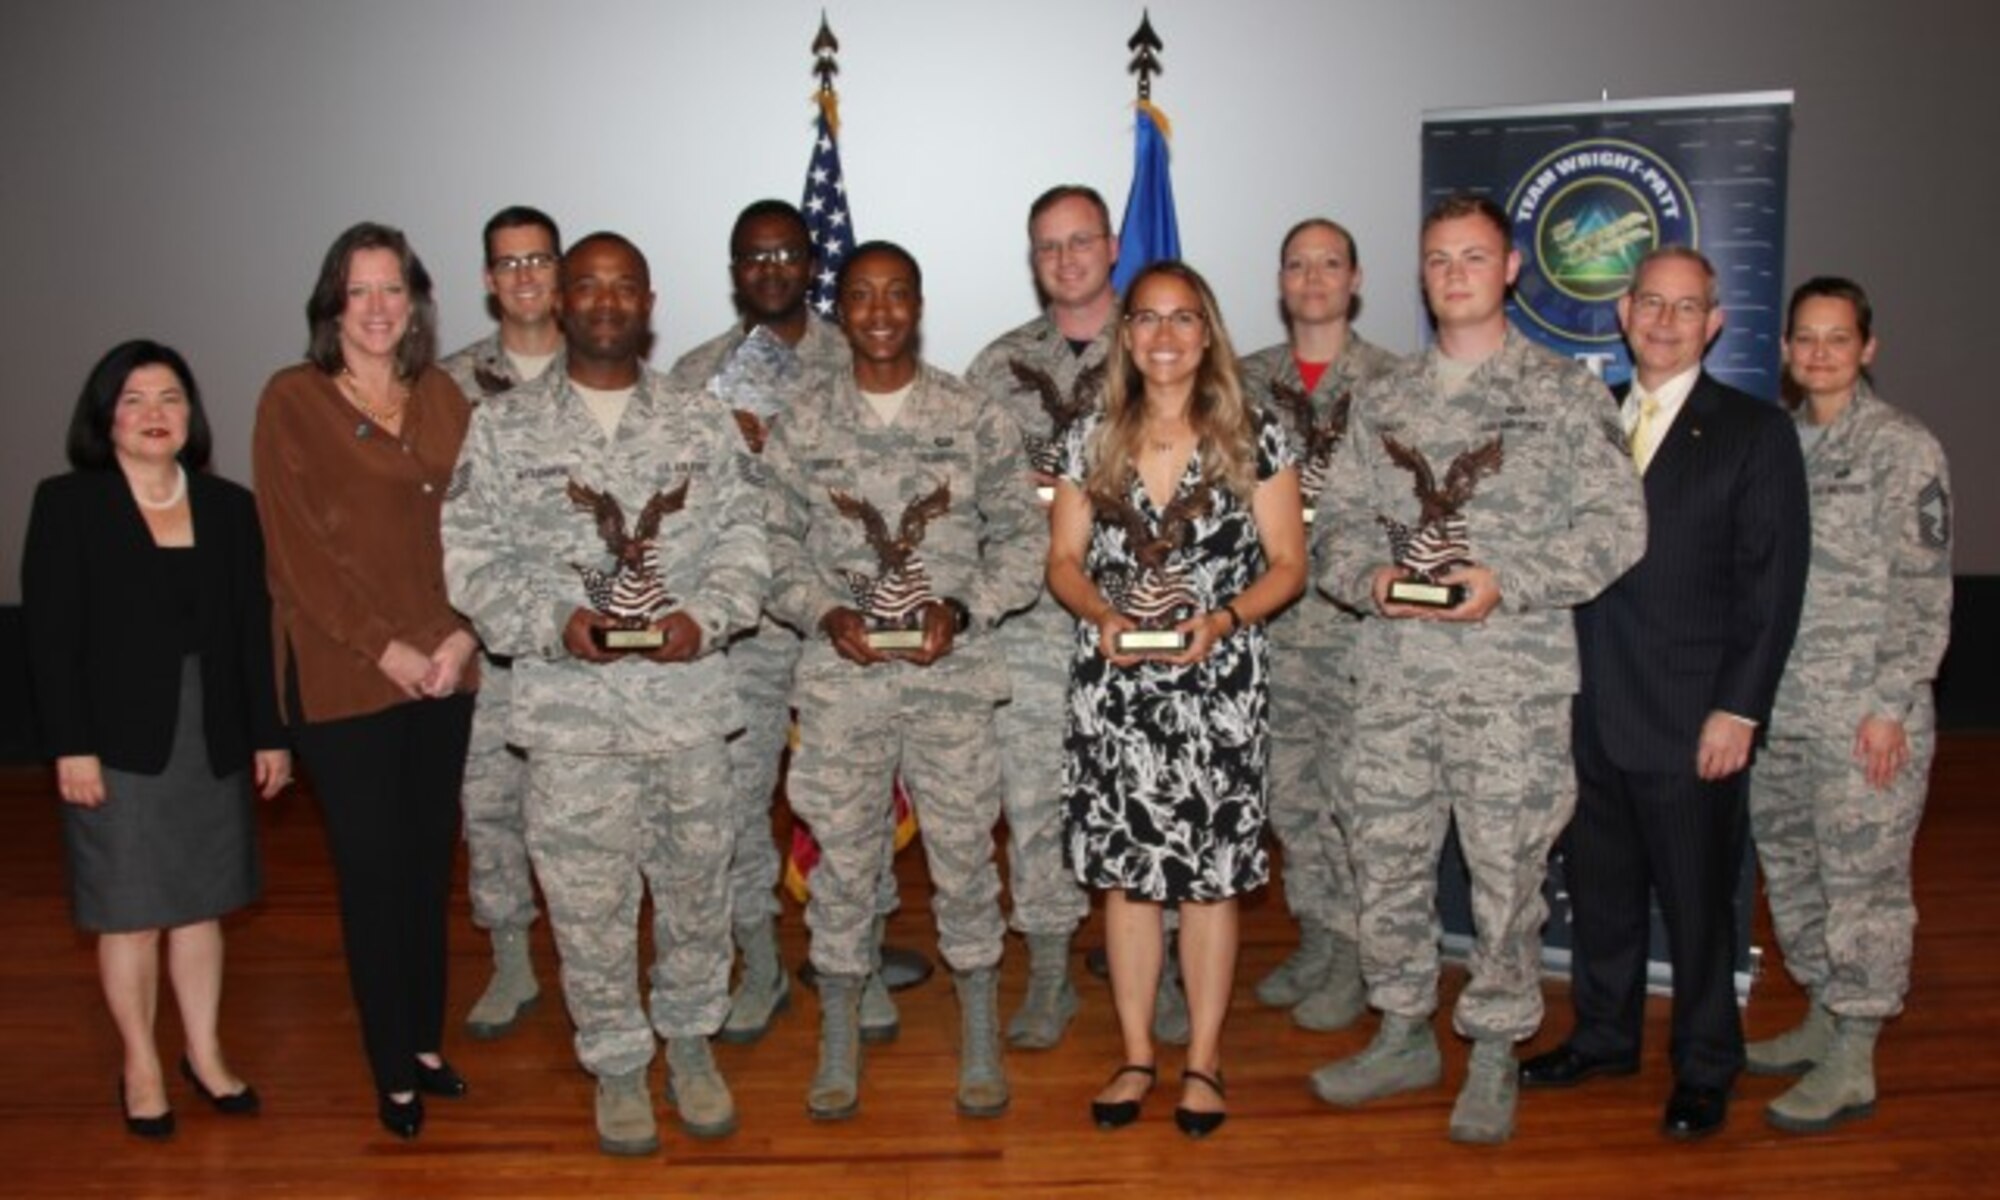 88th Air Base Wing vice director Janet Wirth (left) and 88th Mission Support Group superintendent Chief Master Sergeant Rhonda Walls (right) recognized the 88th Air Base Wing’s 2nd quarter award winners during a ceremony at the base theater, Wright-Patterson Air Force Base, Ohio, August 10, 2018. (U.S. Air Force Photo/Thomas Lewis)